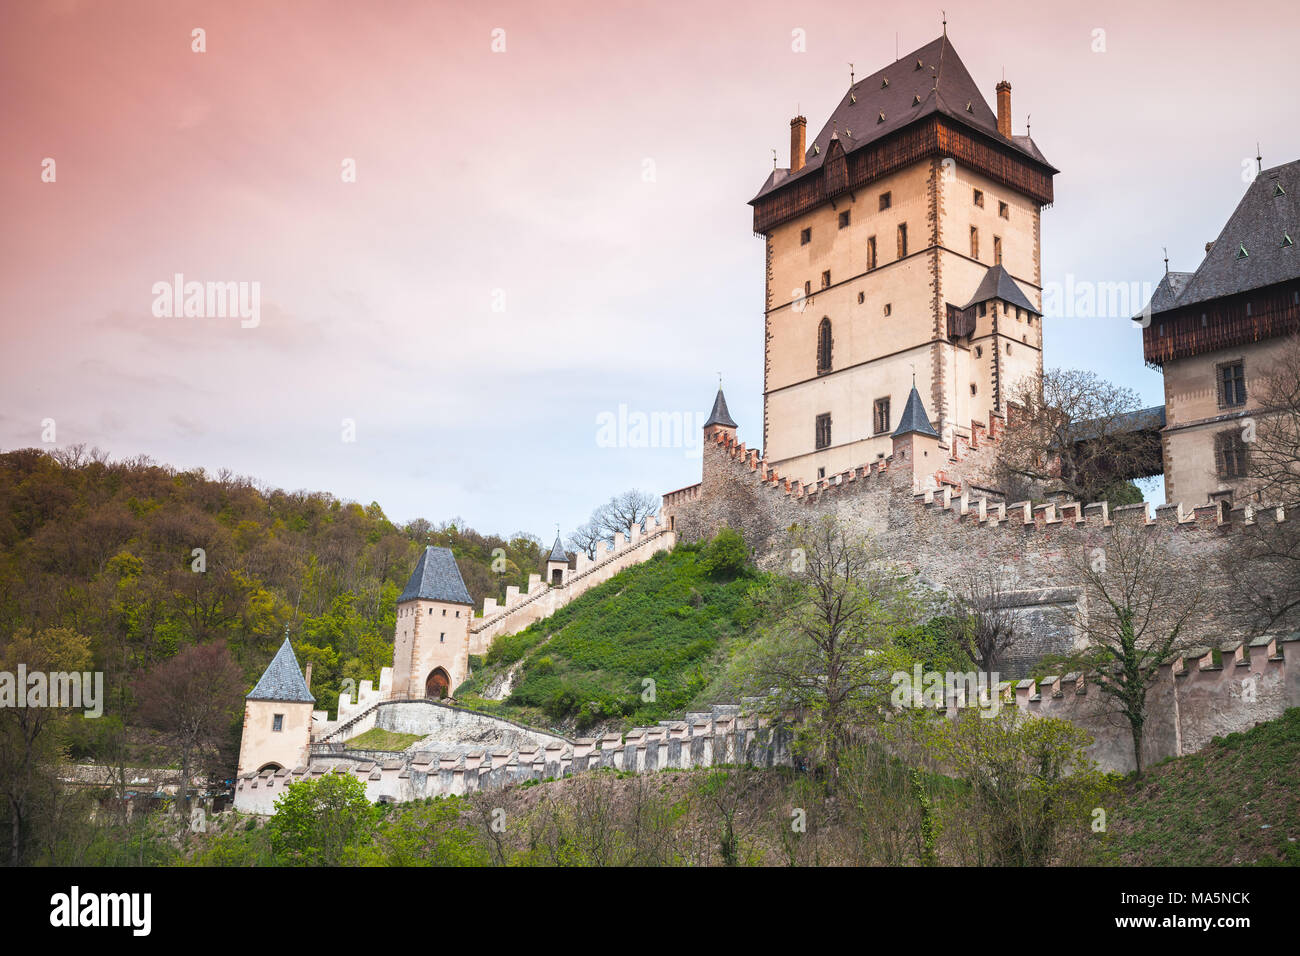 Karlstejn castle founded 1348 CE by Charles IV, Holy Roman Emperor-elect and King of Bohemia. Karlstejn village, Czech Republic Stock Photo